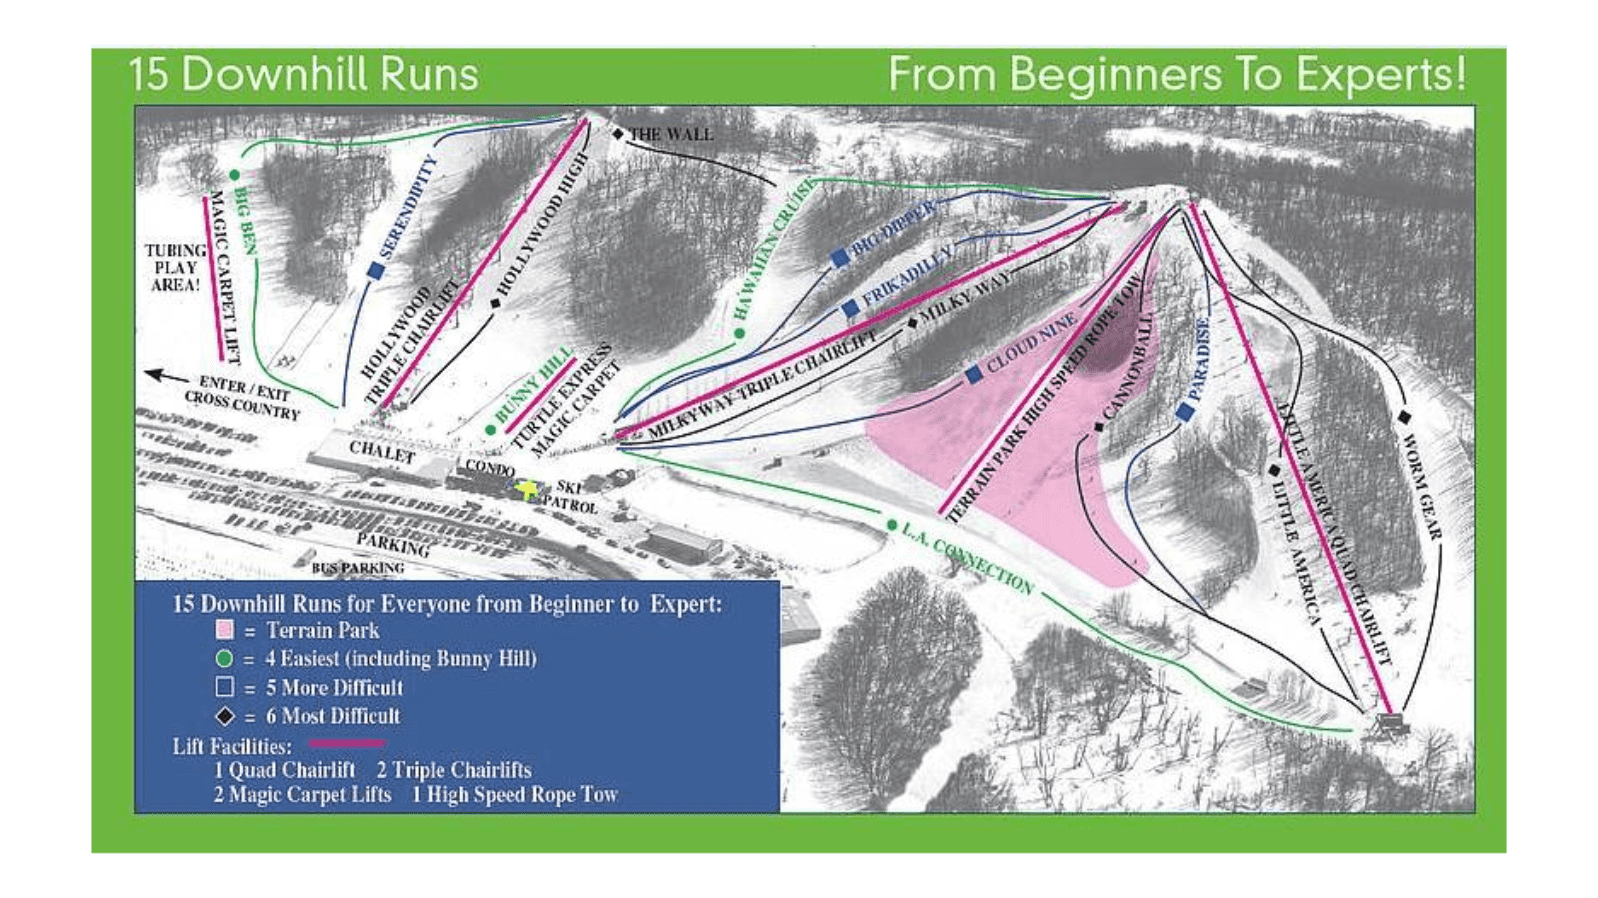 andes tower hills, trail map, Minnesota, race to open